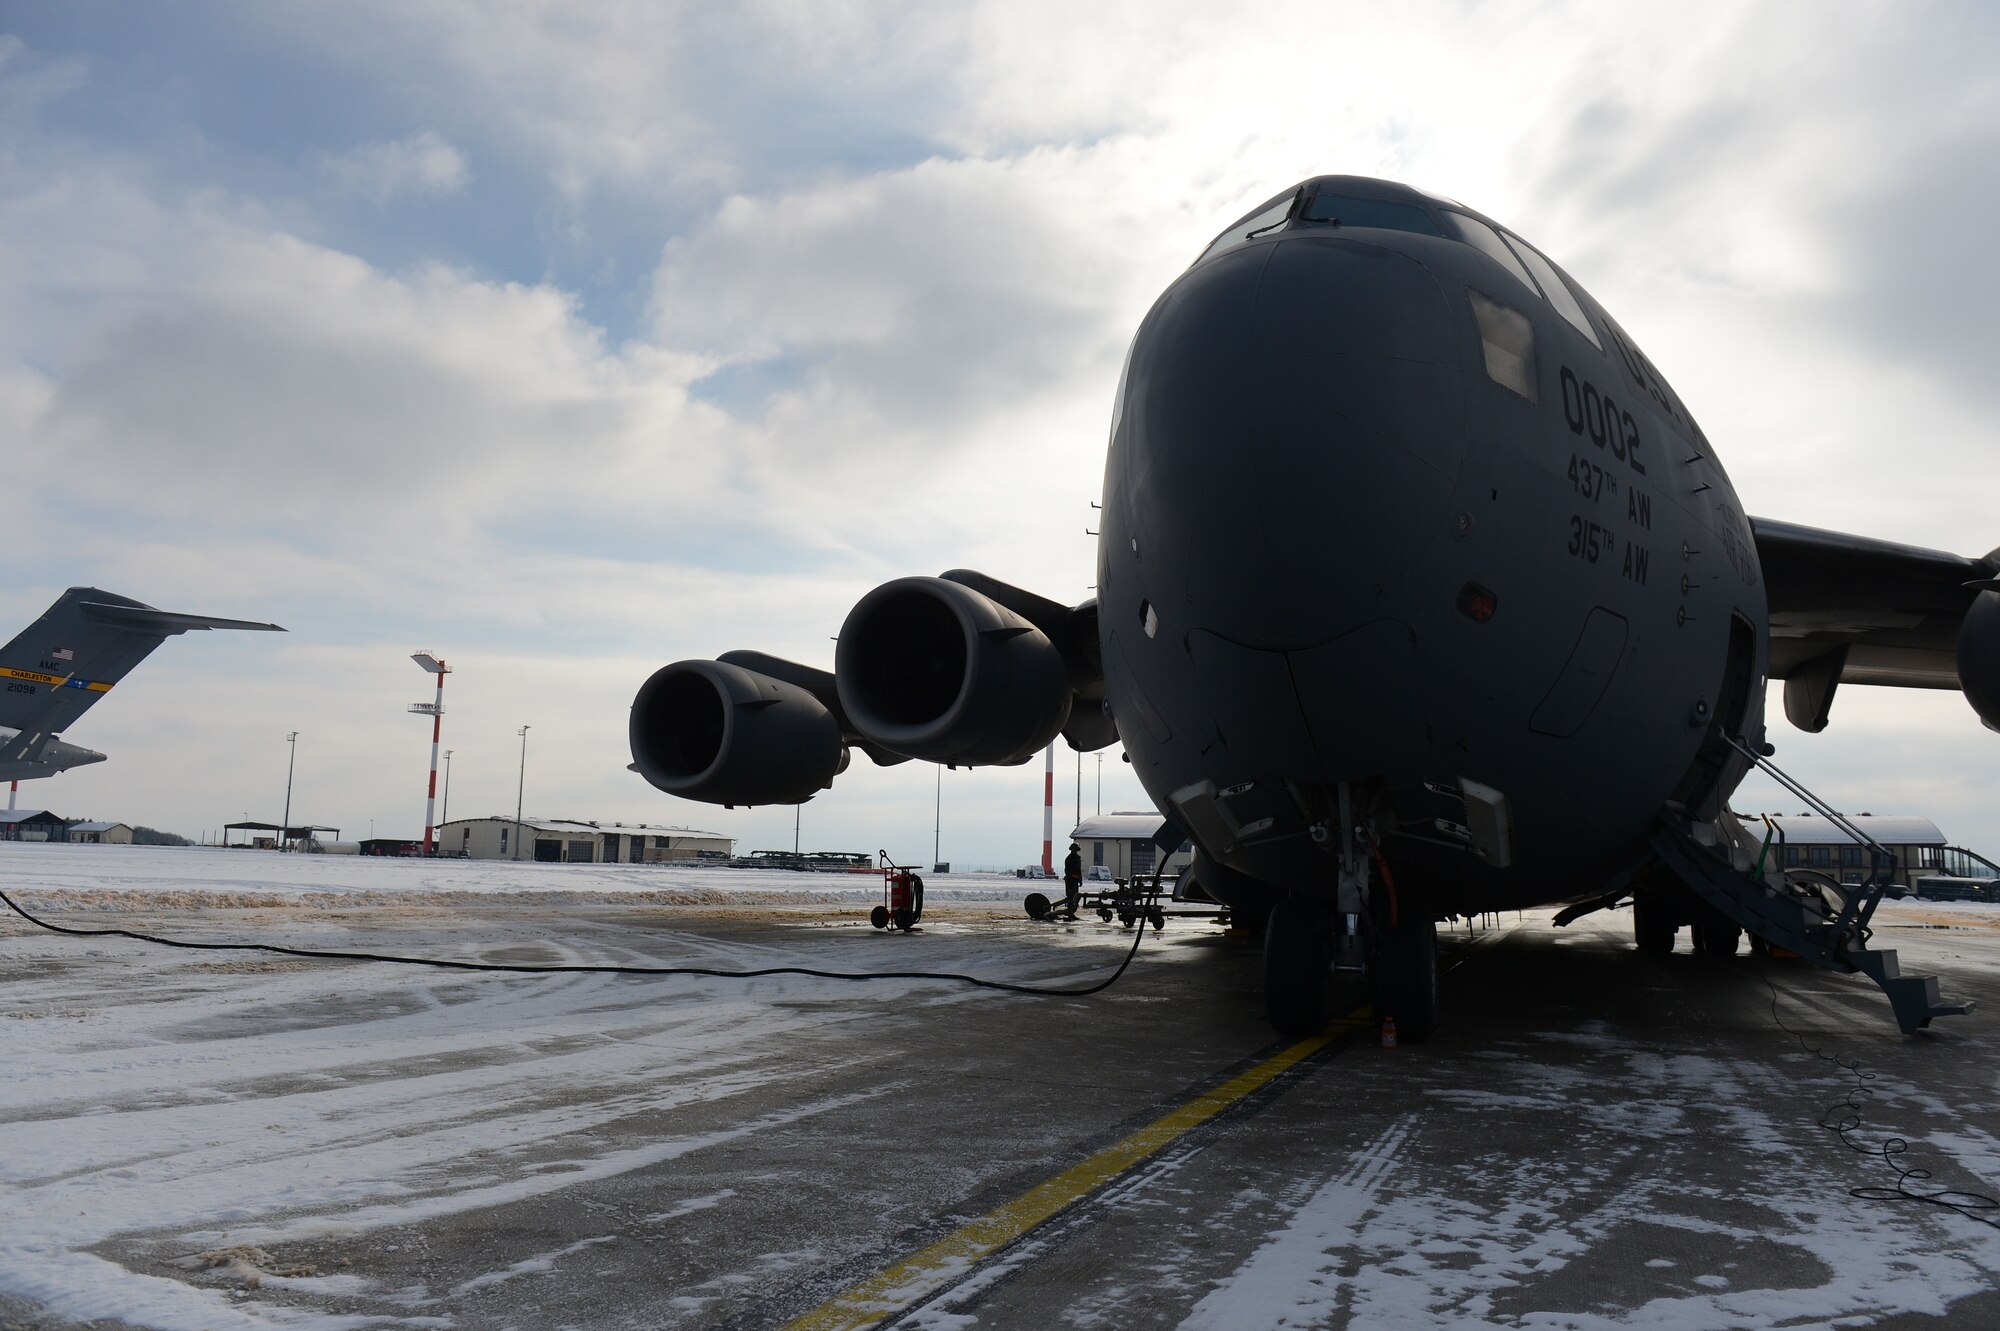 SPANGDAHLEM AIR BASE, Germany – A C-17 Globemaster III sits on the flightline March 13, 2013. Airmen from the 726th Air Mobility Squadron must perform a thorough flight inspection prior to aircraft departing. (U.S. Air Force photo by Airman 1st Class Gustavo Castillo/Released)